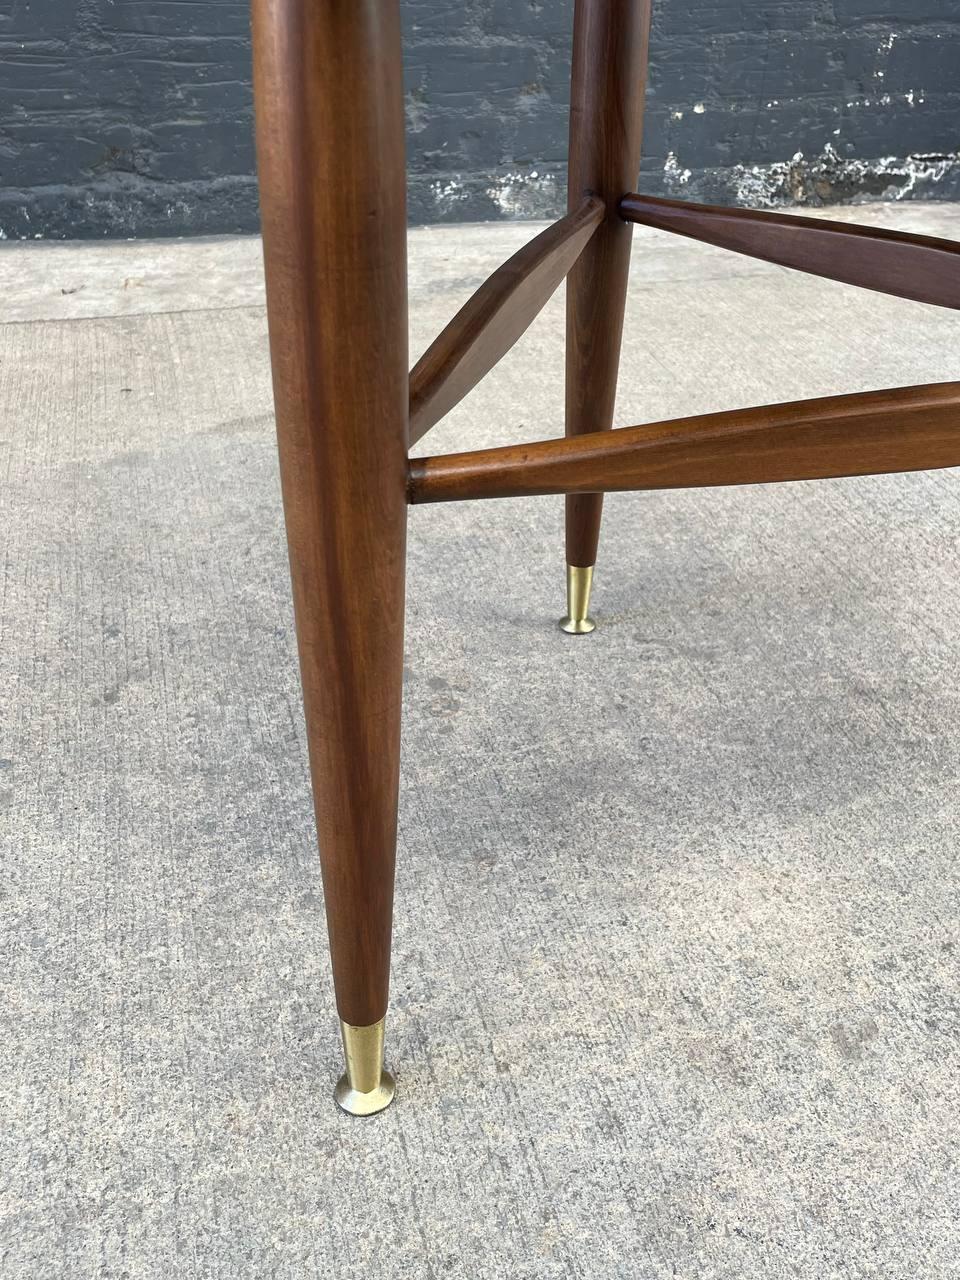 Newly Refinished - Mid-Century Modern Walnut Guitar Pick Style Side Table In Excellent Condition For Sale In Los Angeles, CA